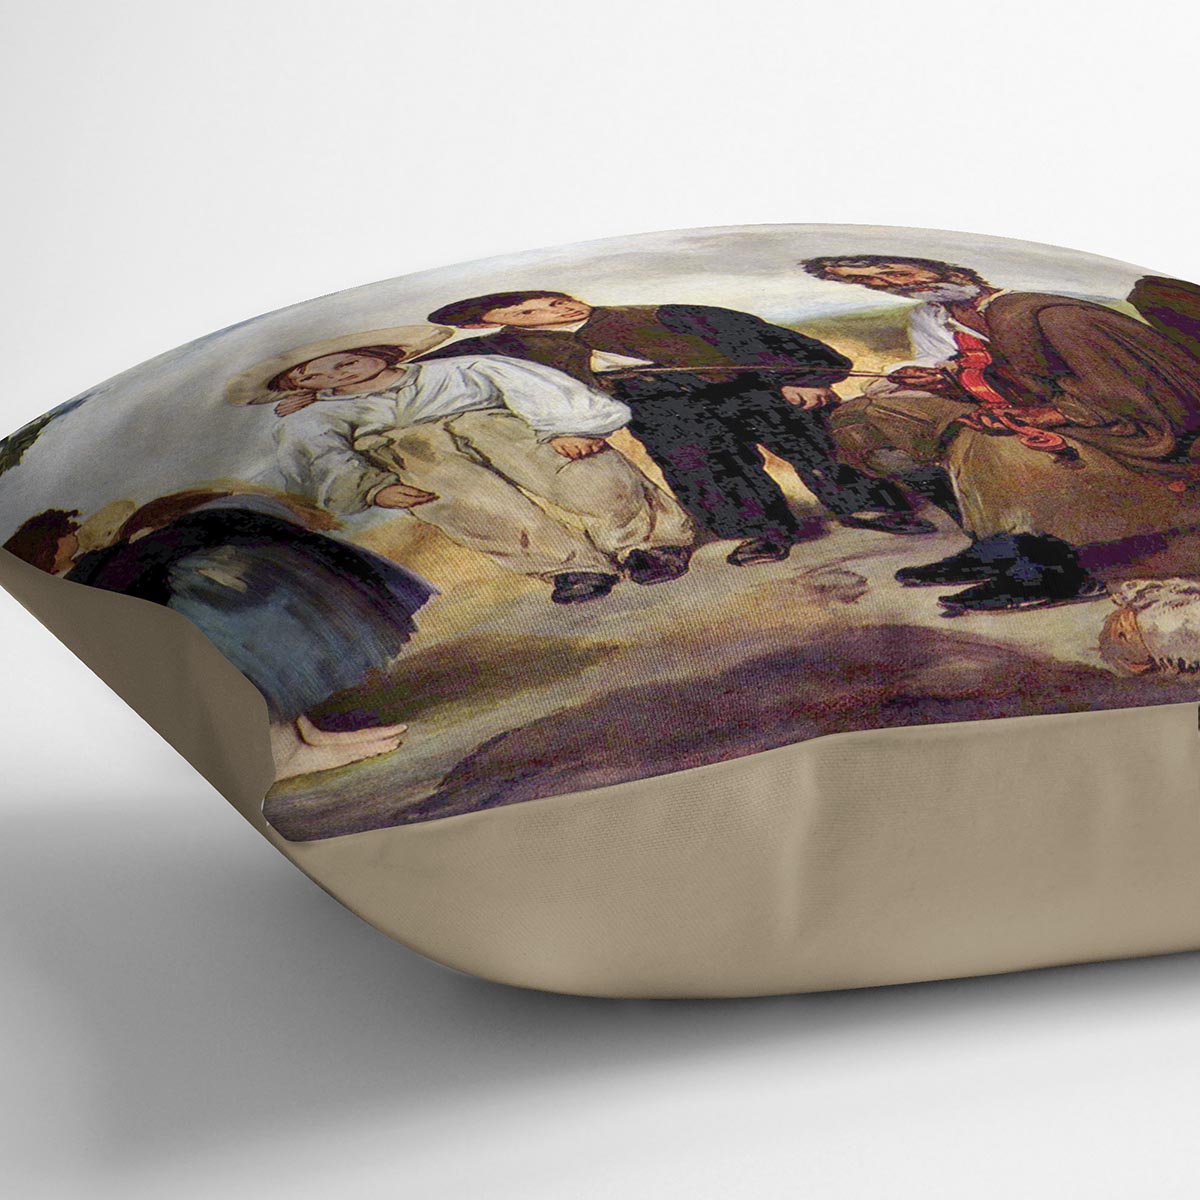 The old musician by Manet Cushion